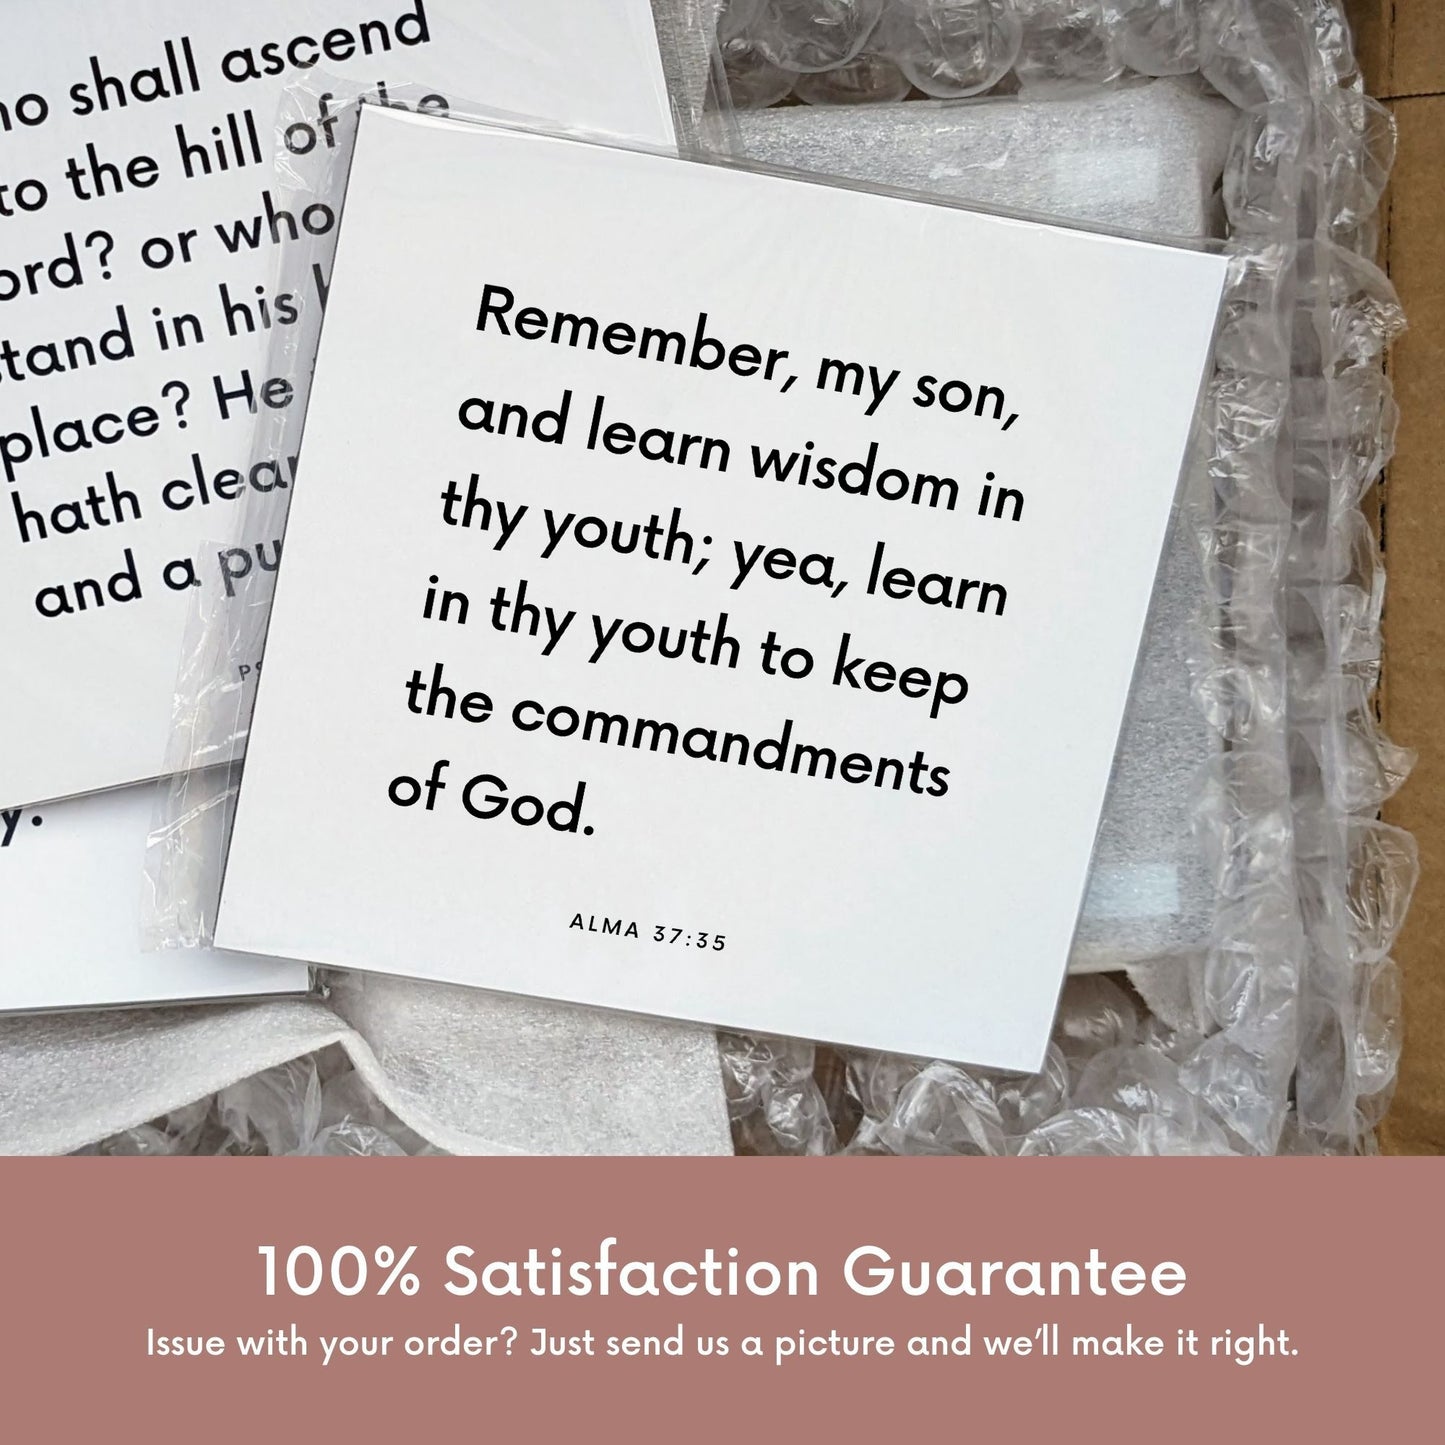 Shipping materials for scripture tile of Alma 37:35 - "Remember, my son, and learn wisdom in thy youth"